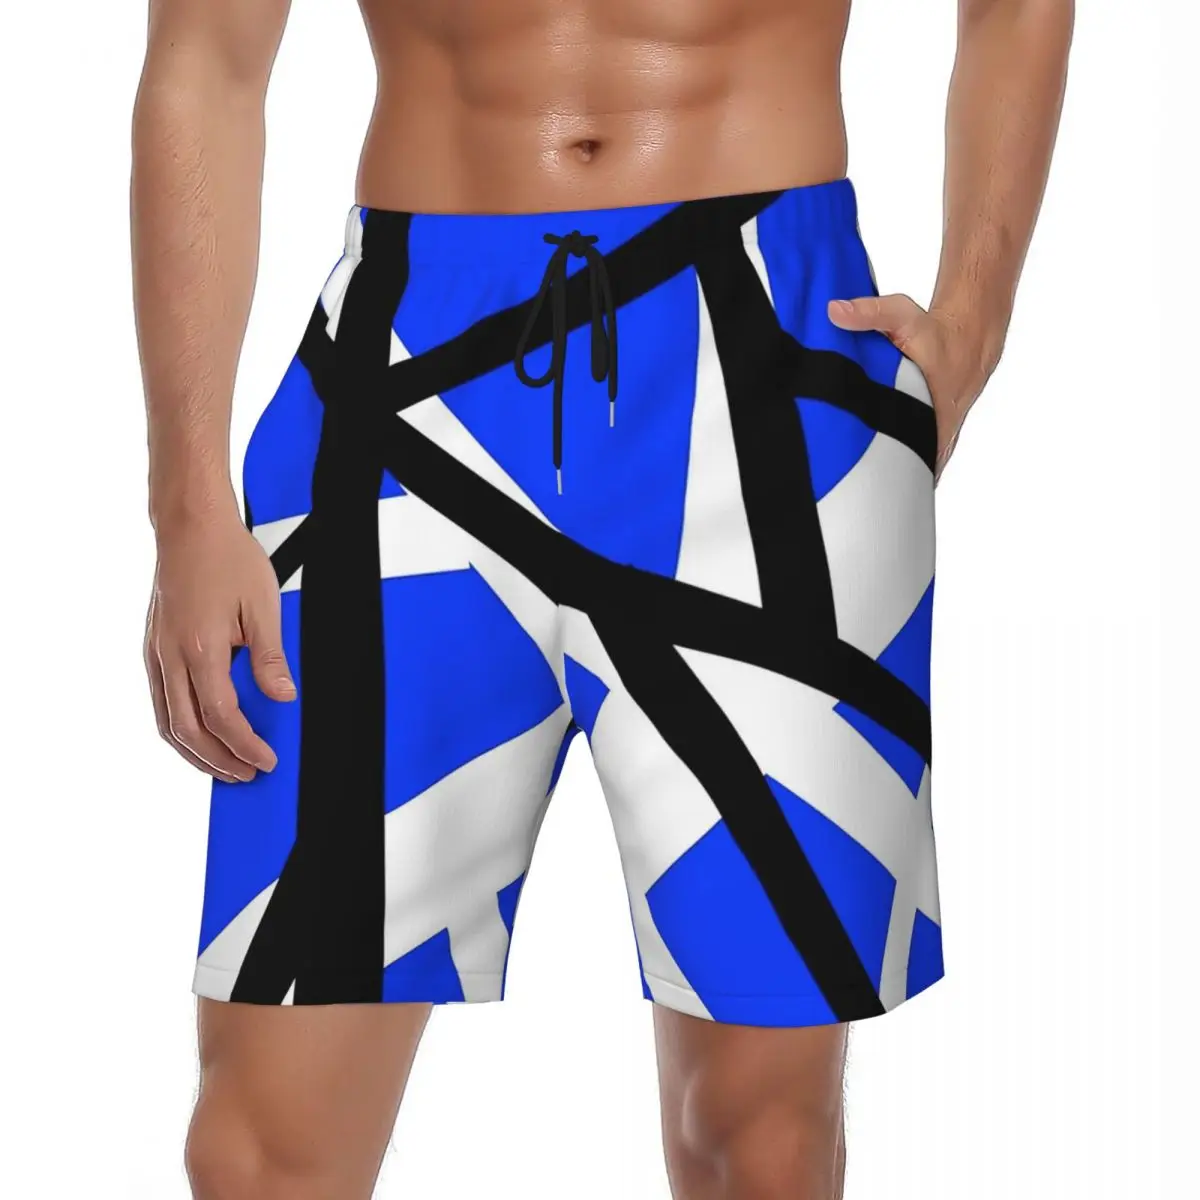 

Summer Gym Shorts Males Van Halen Print Surfing Blue Stripes Board Short Pants Y2K Funny Quick Dry Swimming Trunks Plus Size